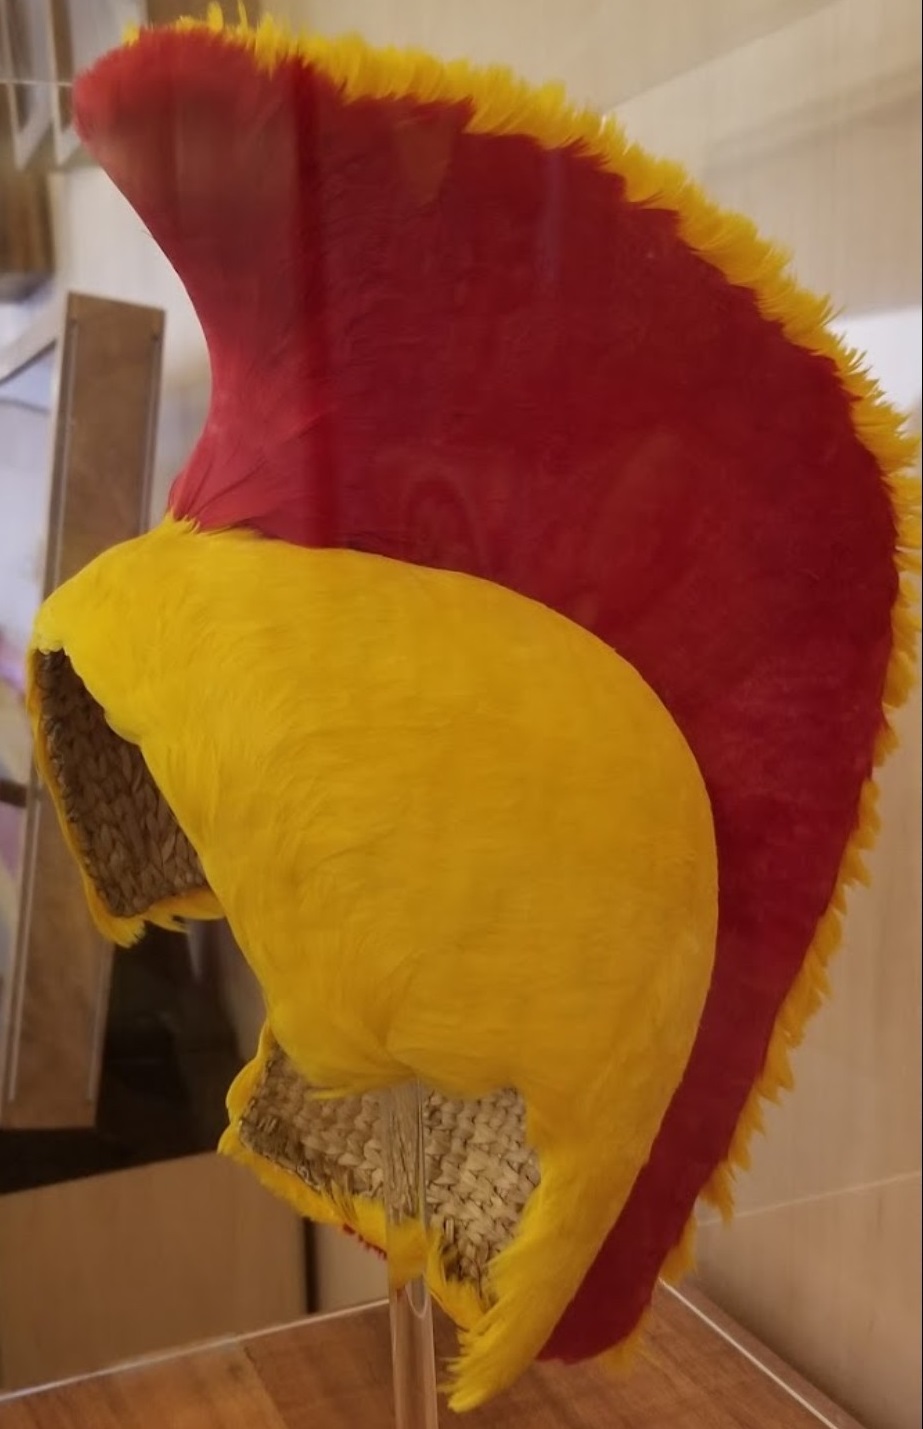 Replica of a traditional Hawaiian helmet with bright red and yellow feathers